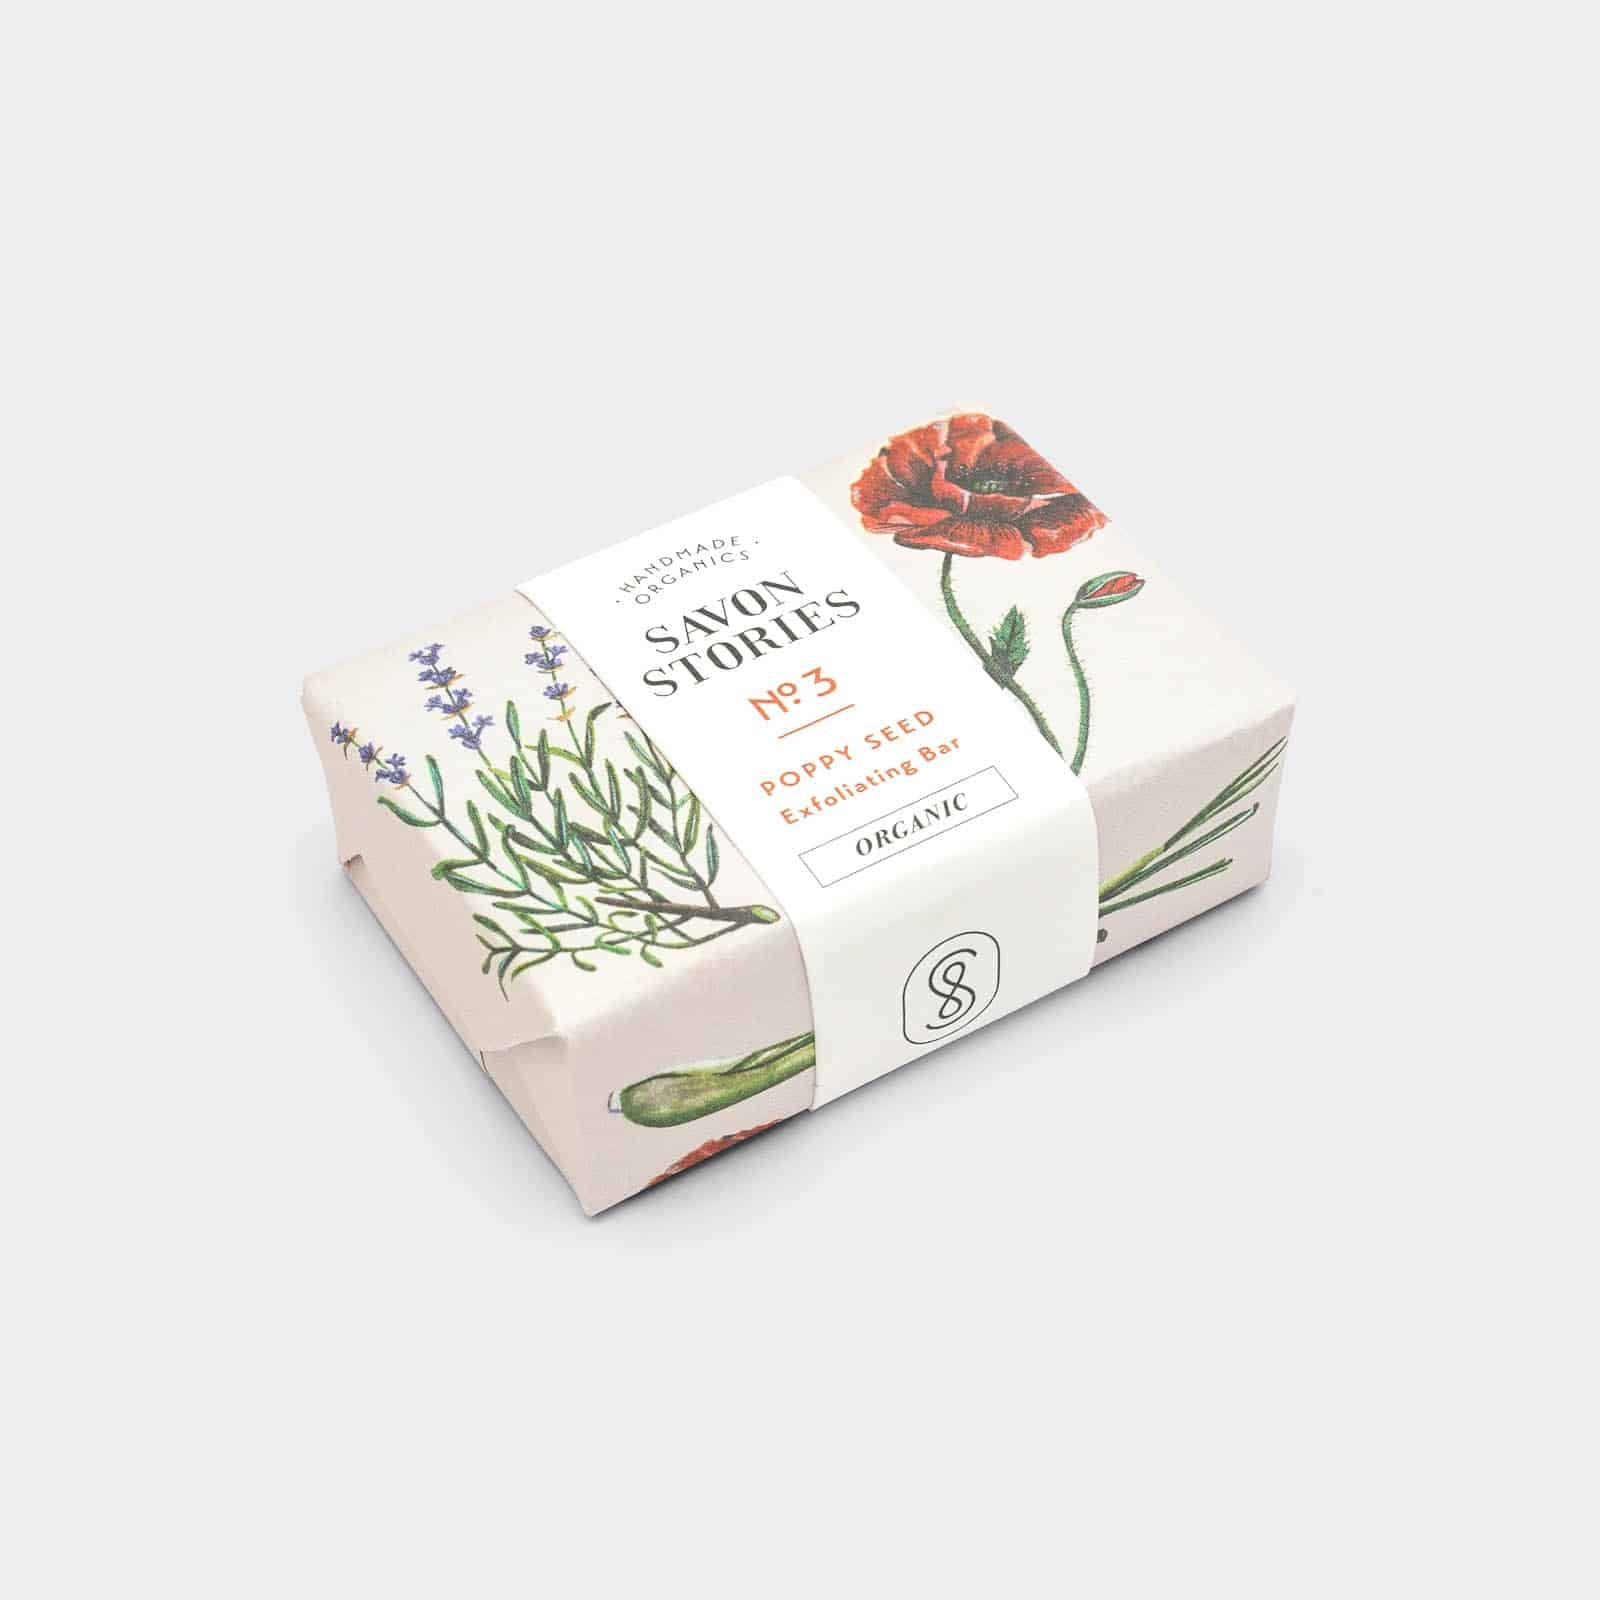 N°3 Organic &amp;amp; Natural Soap Exfoliant with Poppy Seeds